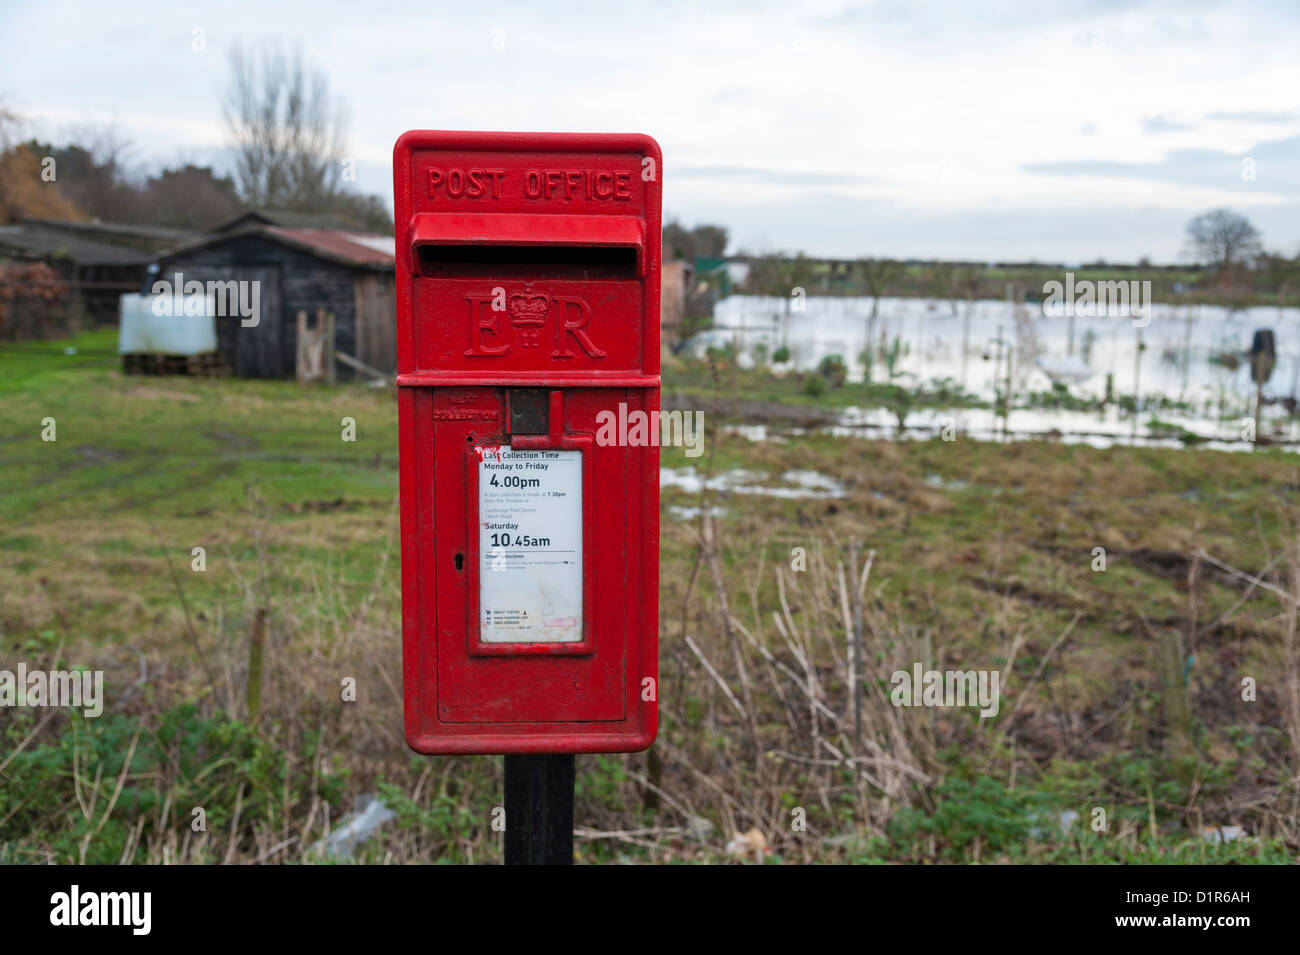 Royal mail post box in a rural area near Cambridge UK Stock Photo